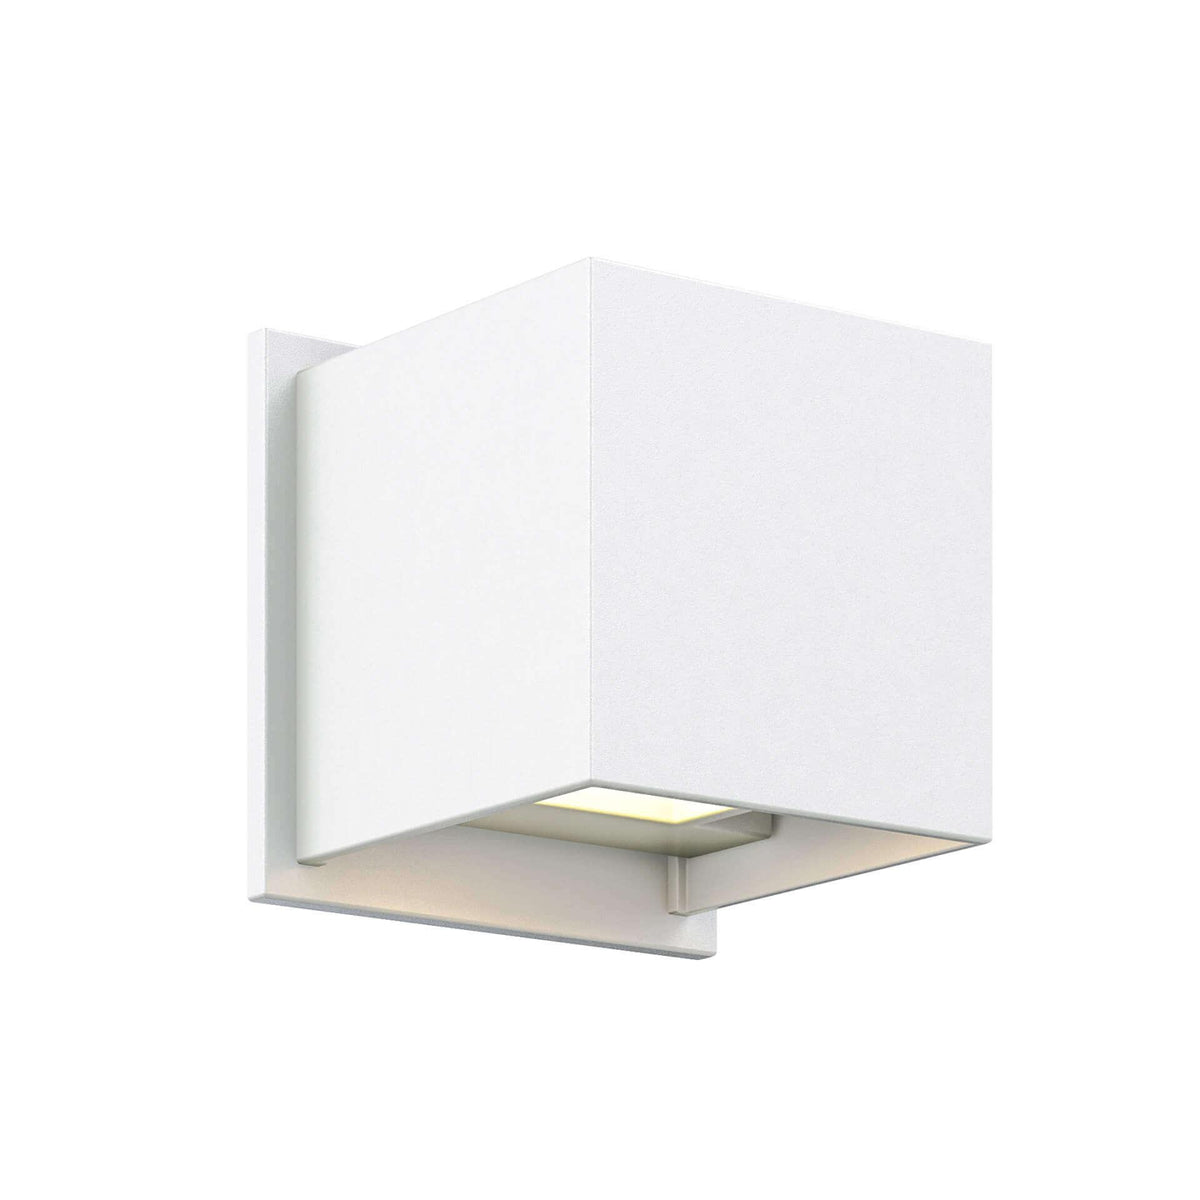 Dals Lighting - LEDWALL001D Square Up/Down LED Wall Light - LEDWALL001D-WH | Montreal Lighting & Hardware